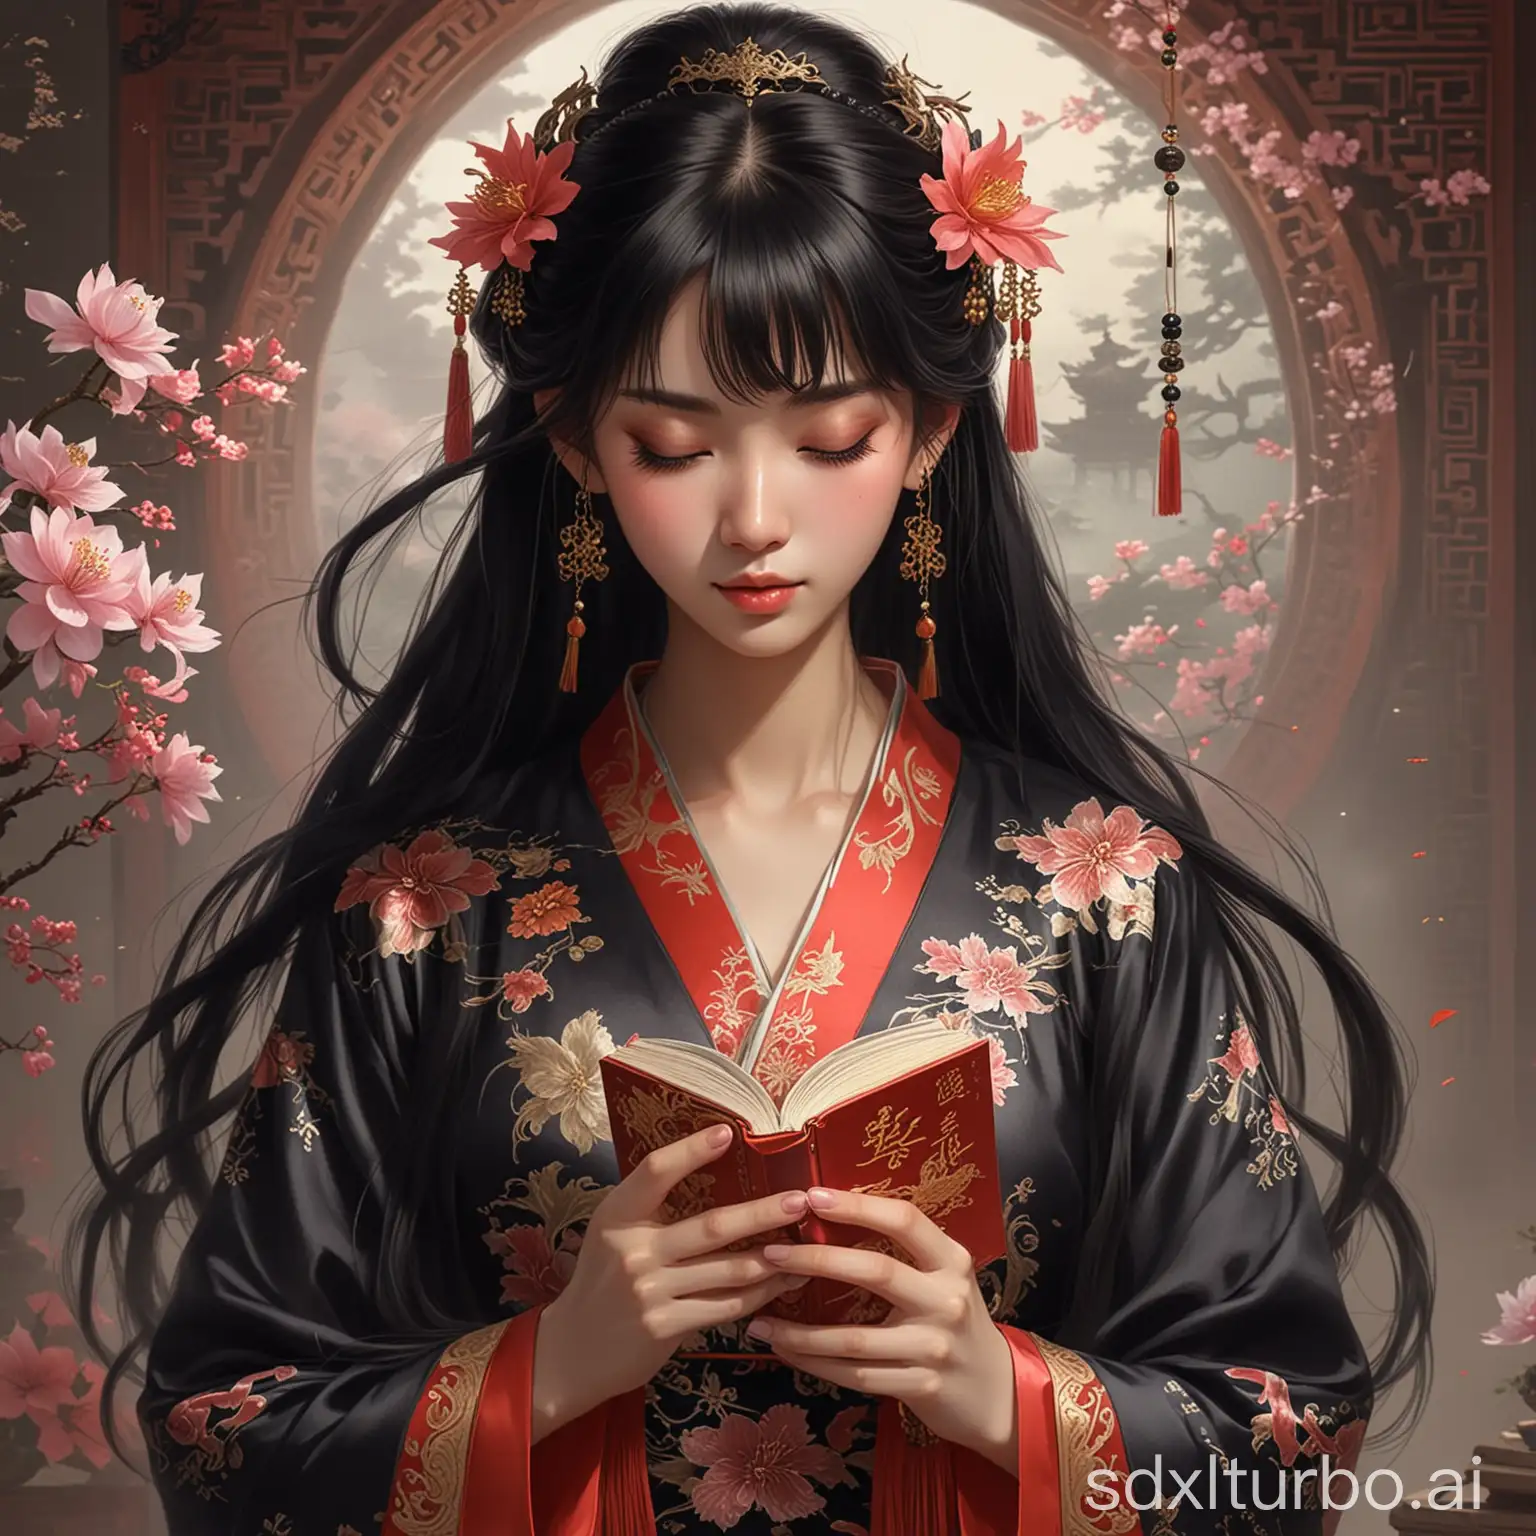 Elegant-Asian-Woman-with-DragonThemed-Accessories-and-Book